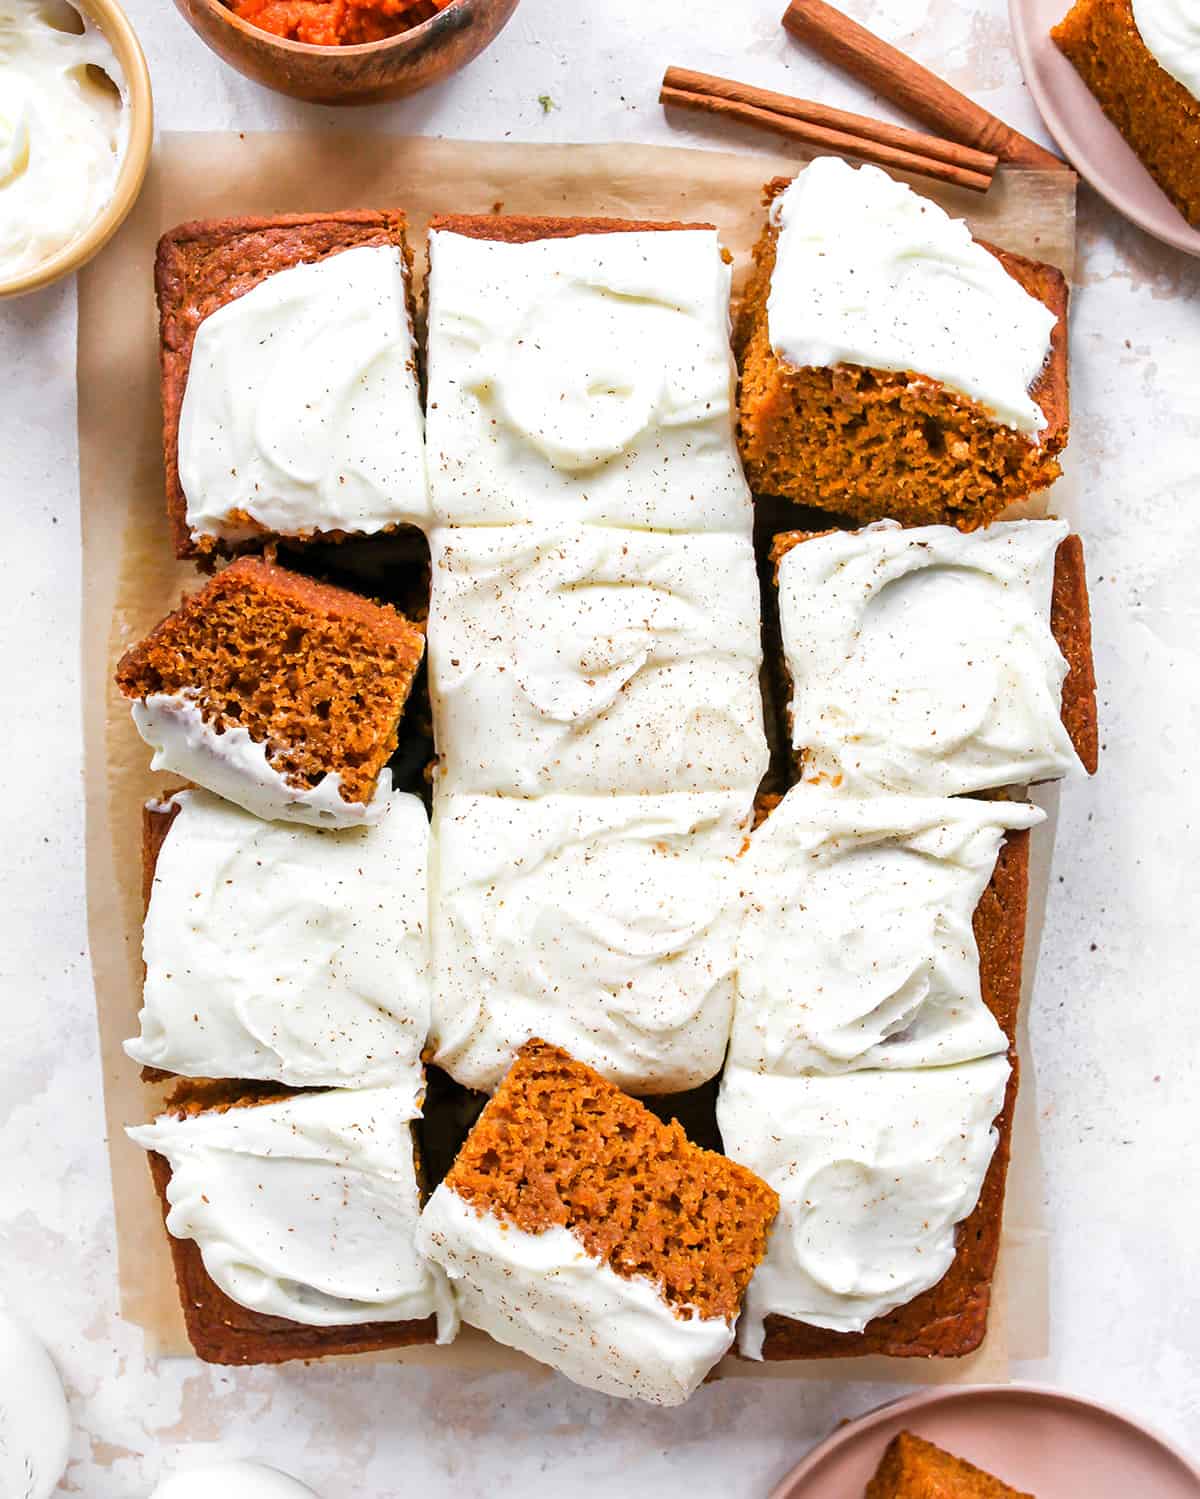 Overhead view of a Pumpkin Cake with cream cheese frosting cut into 12 pieces